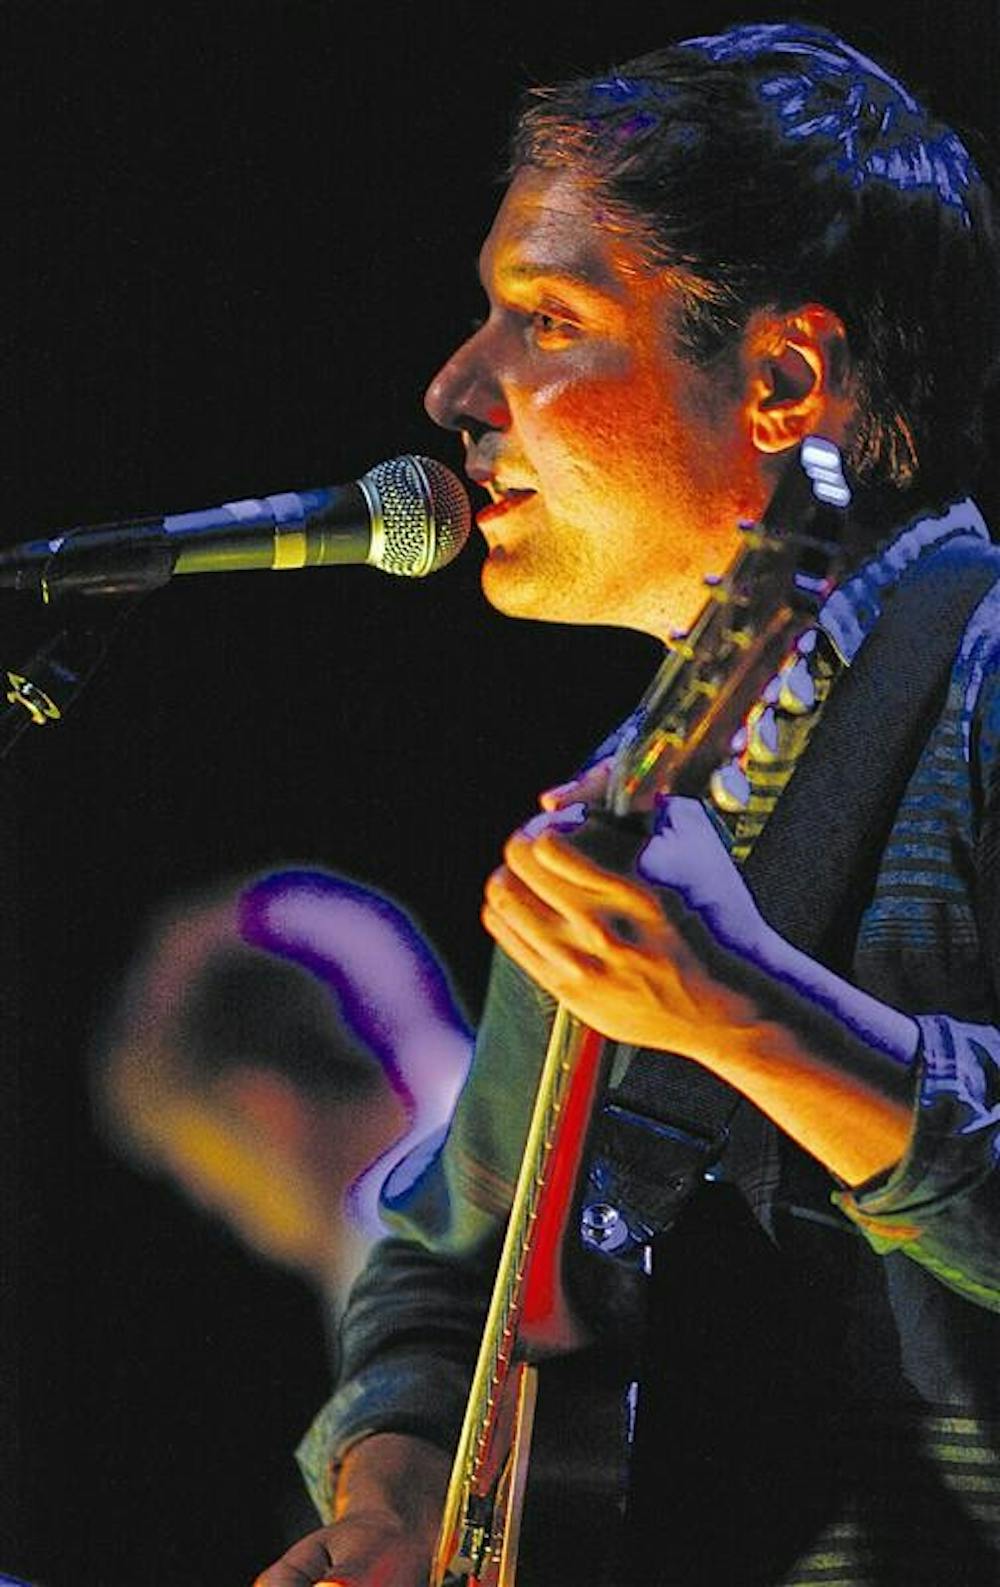 Daniel Rossen of Grizzly Bear sings Tuesday evening at the Buskirk-Chumley Theater. The band recently released its third album on May 26.